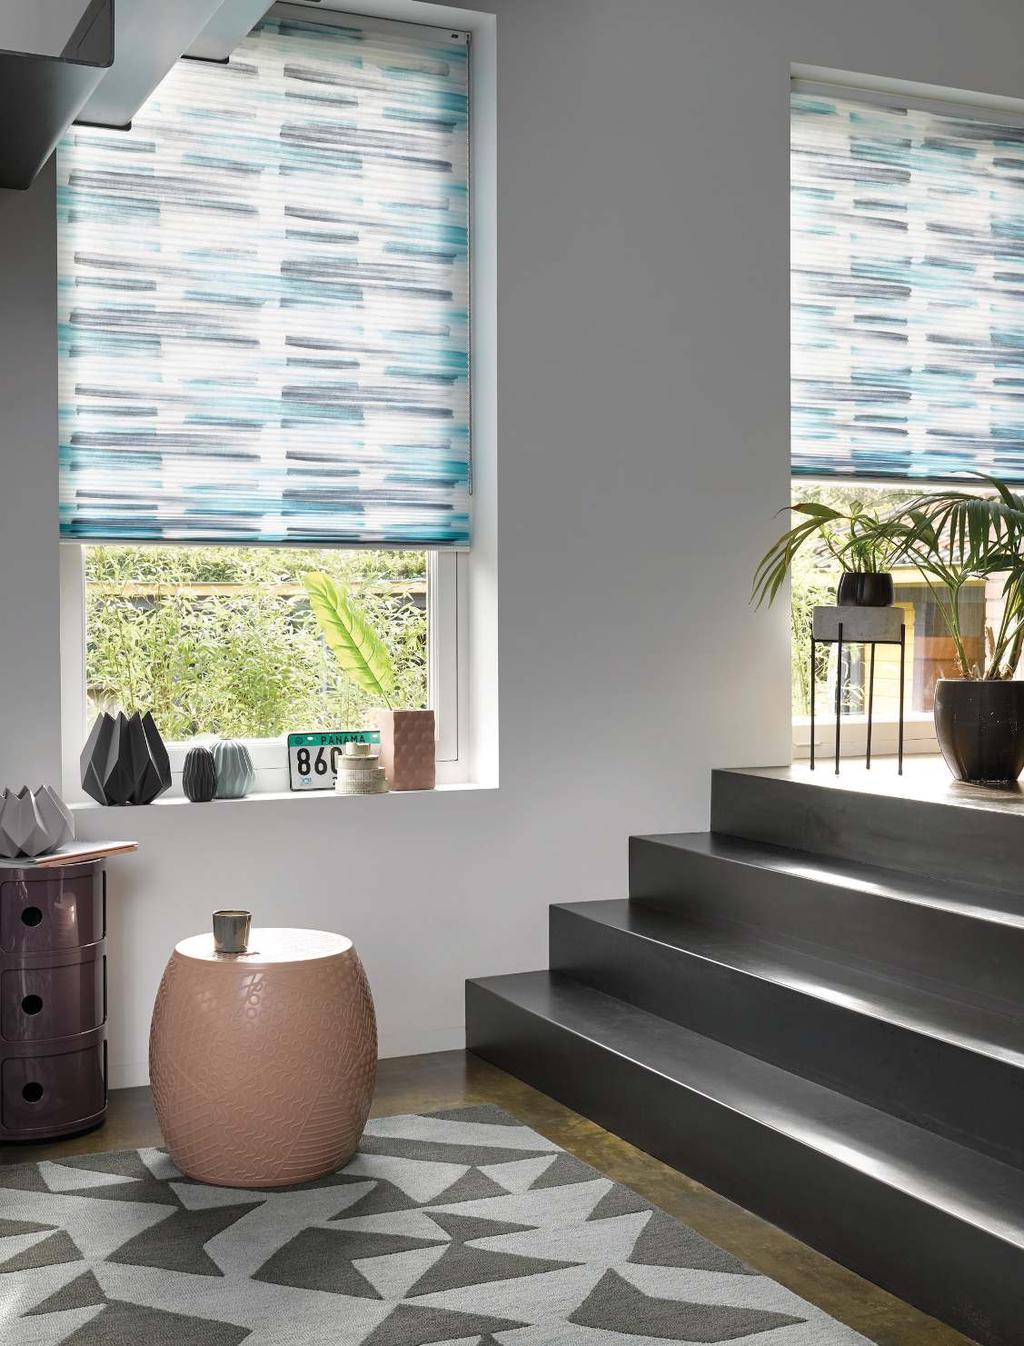 Future perfect Our new Duette Shades collection has a wide range of beautiful fabrics in